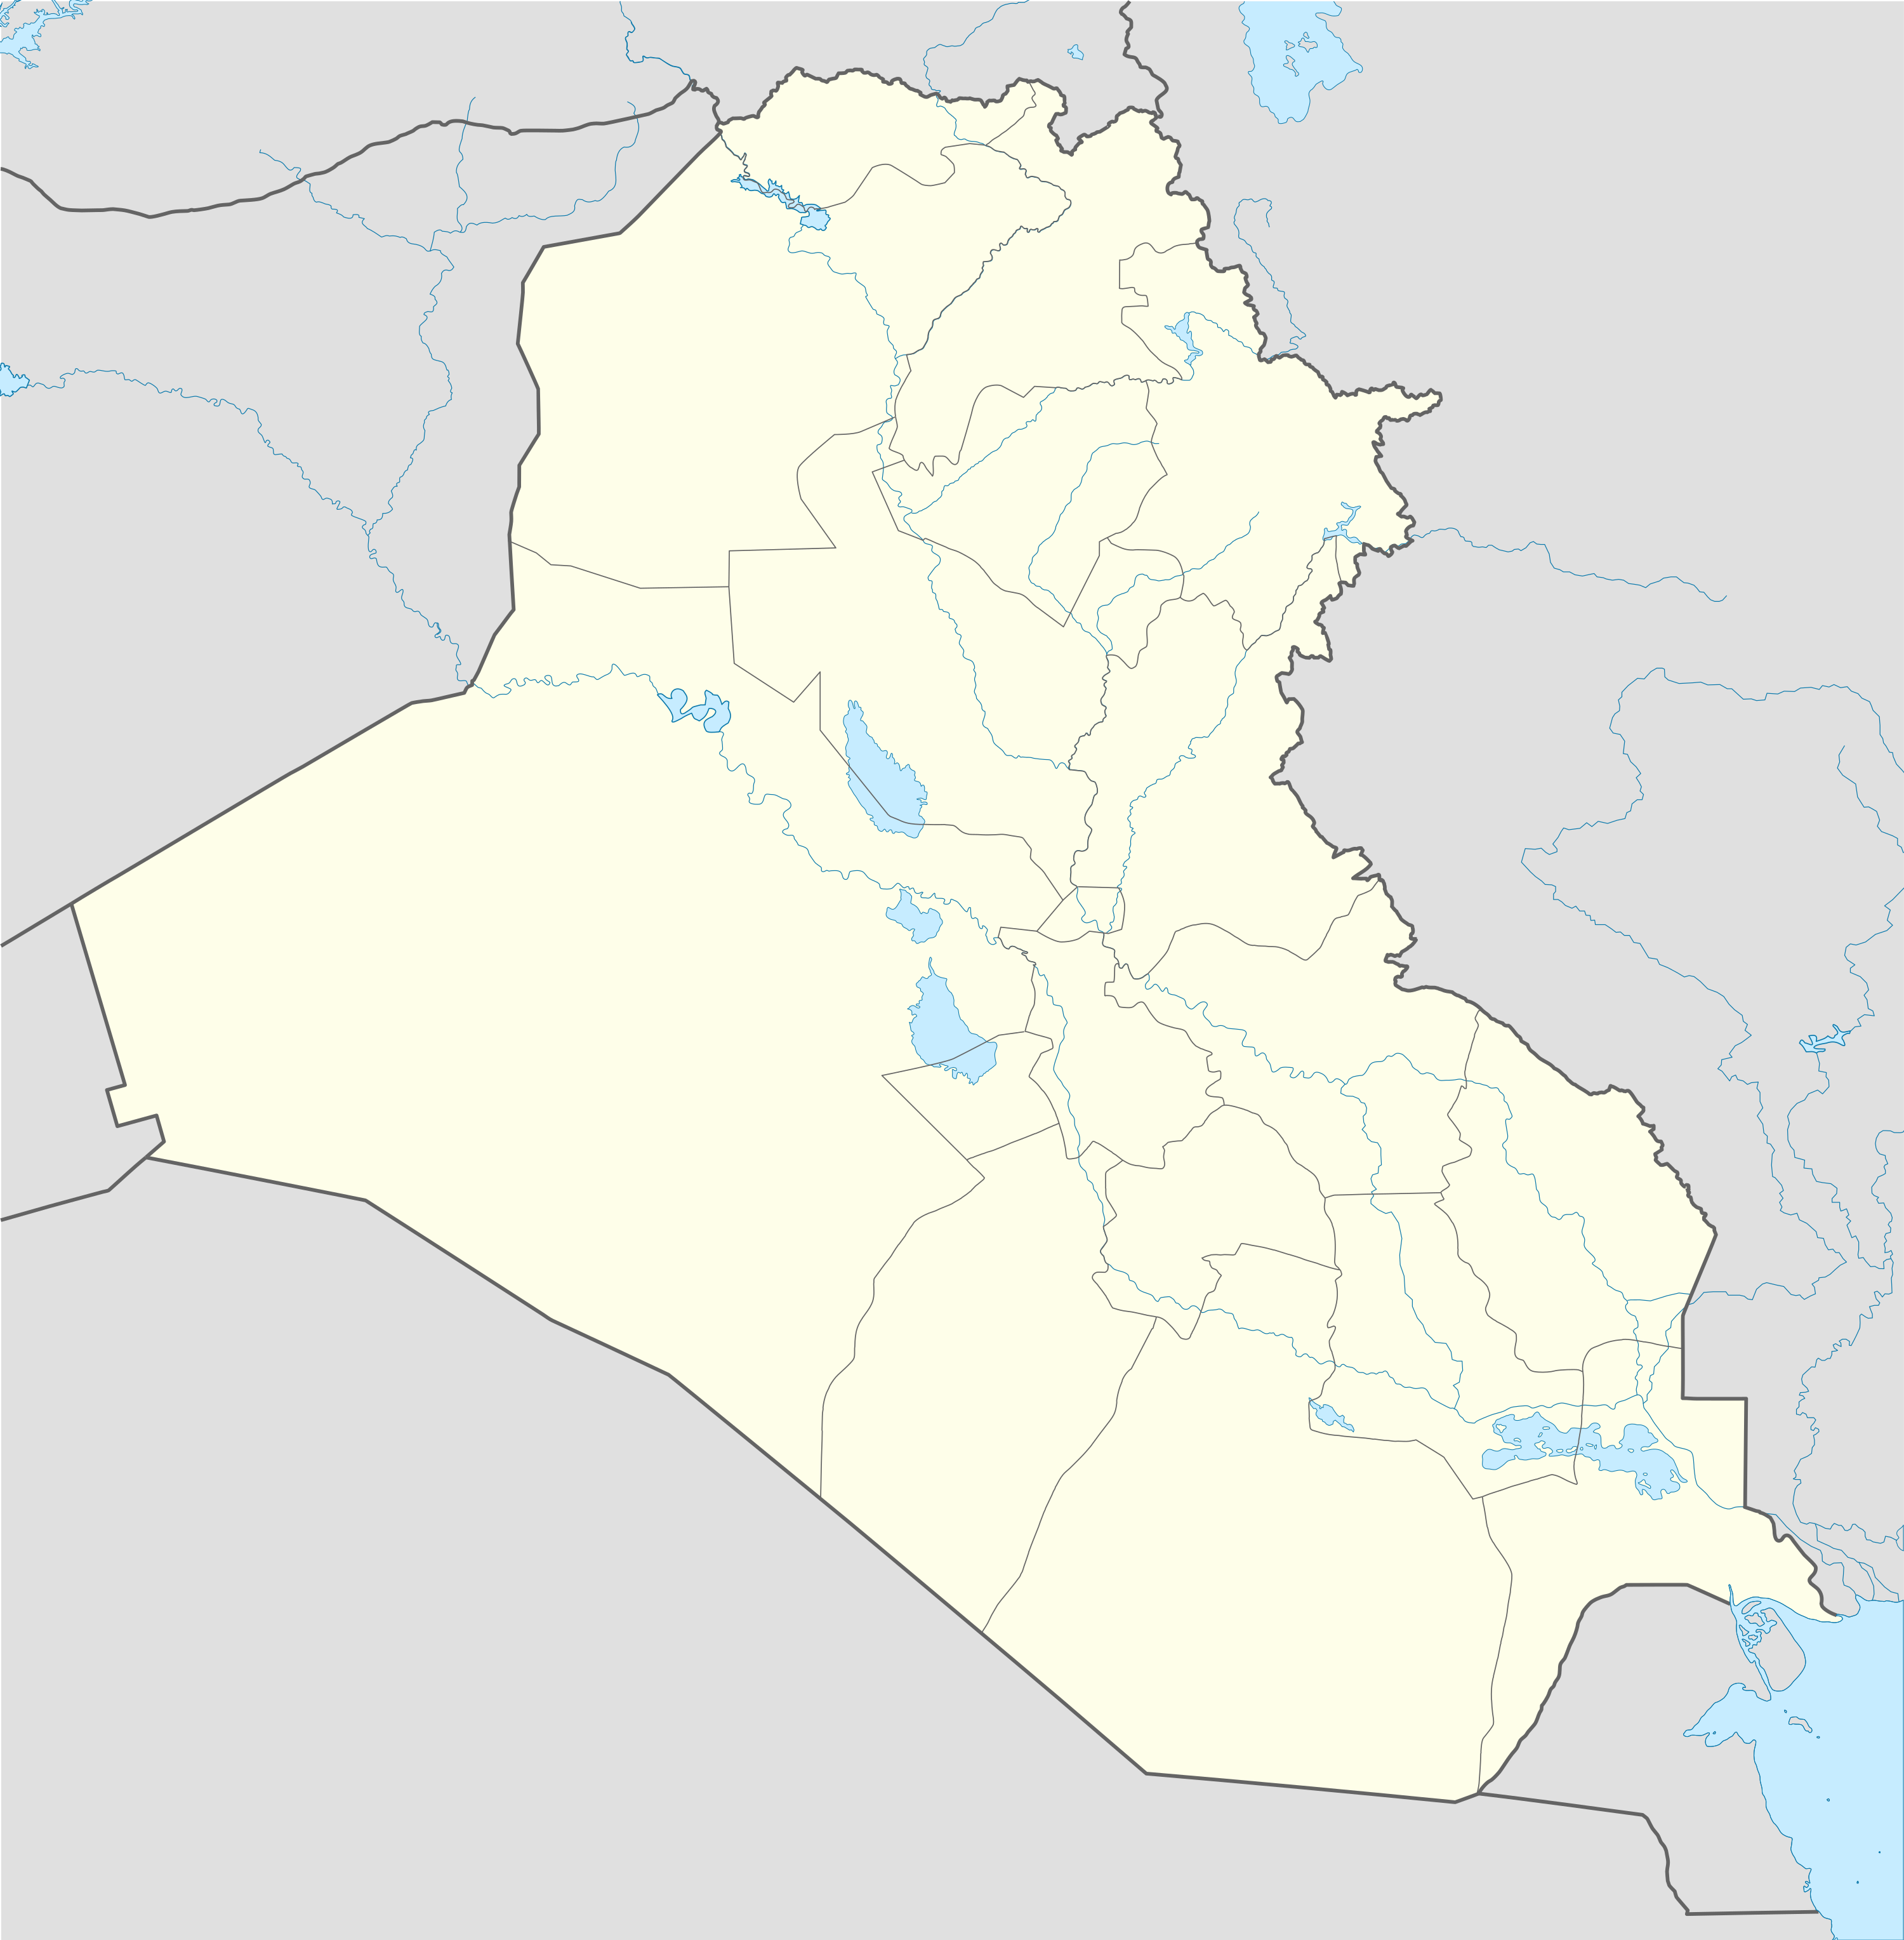 Iraqi insurgency detailed map is located in Iraq